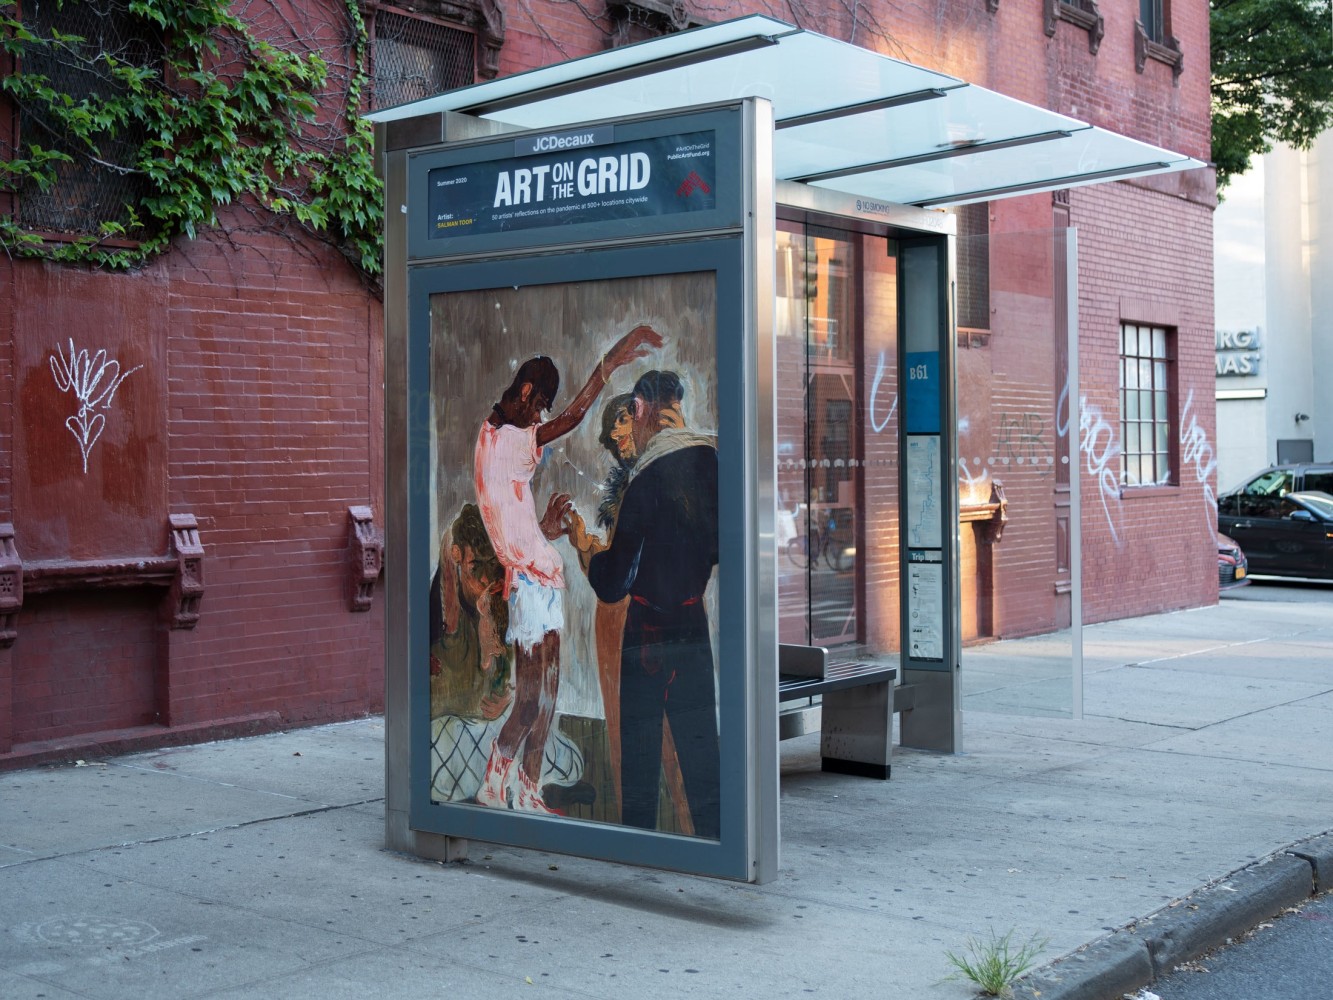 Salman Toor
Downtown Boys, 2020
Driggs Ave&amp;nbsp;between&amp;nbsp;Grand St&amp;nbsp;&amp;amp; S 1 St, Brooklyn
Photographic work as a part of&amp;nbsp;Art on the Grid, presented by Public Art Fund on JCDecaux bus shelters citywide
June 29, 2020 &amp;ndash; September 20, 2020